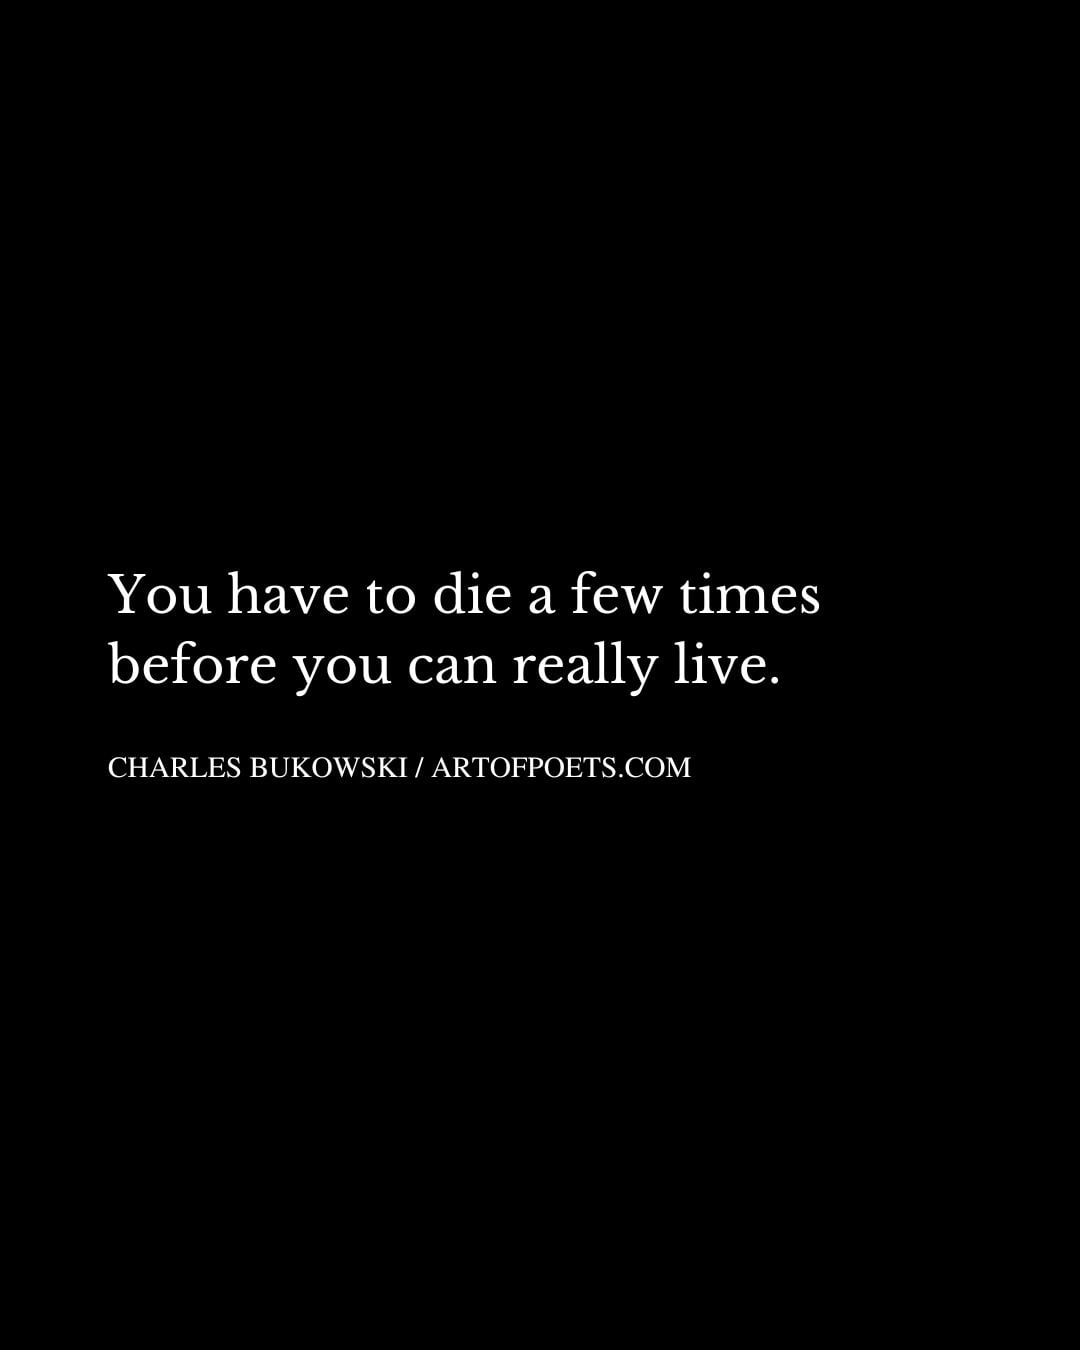 You have to die a few times before you can really live